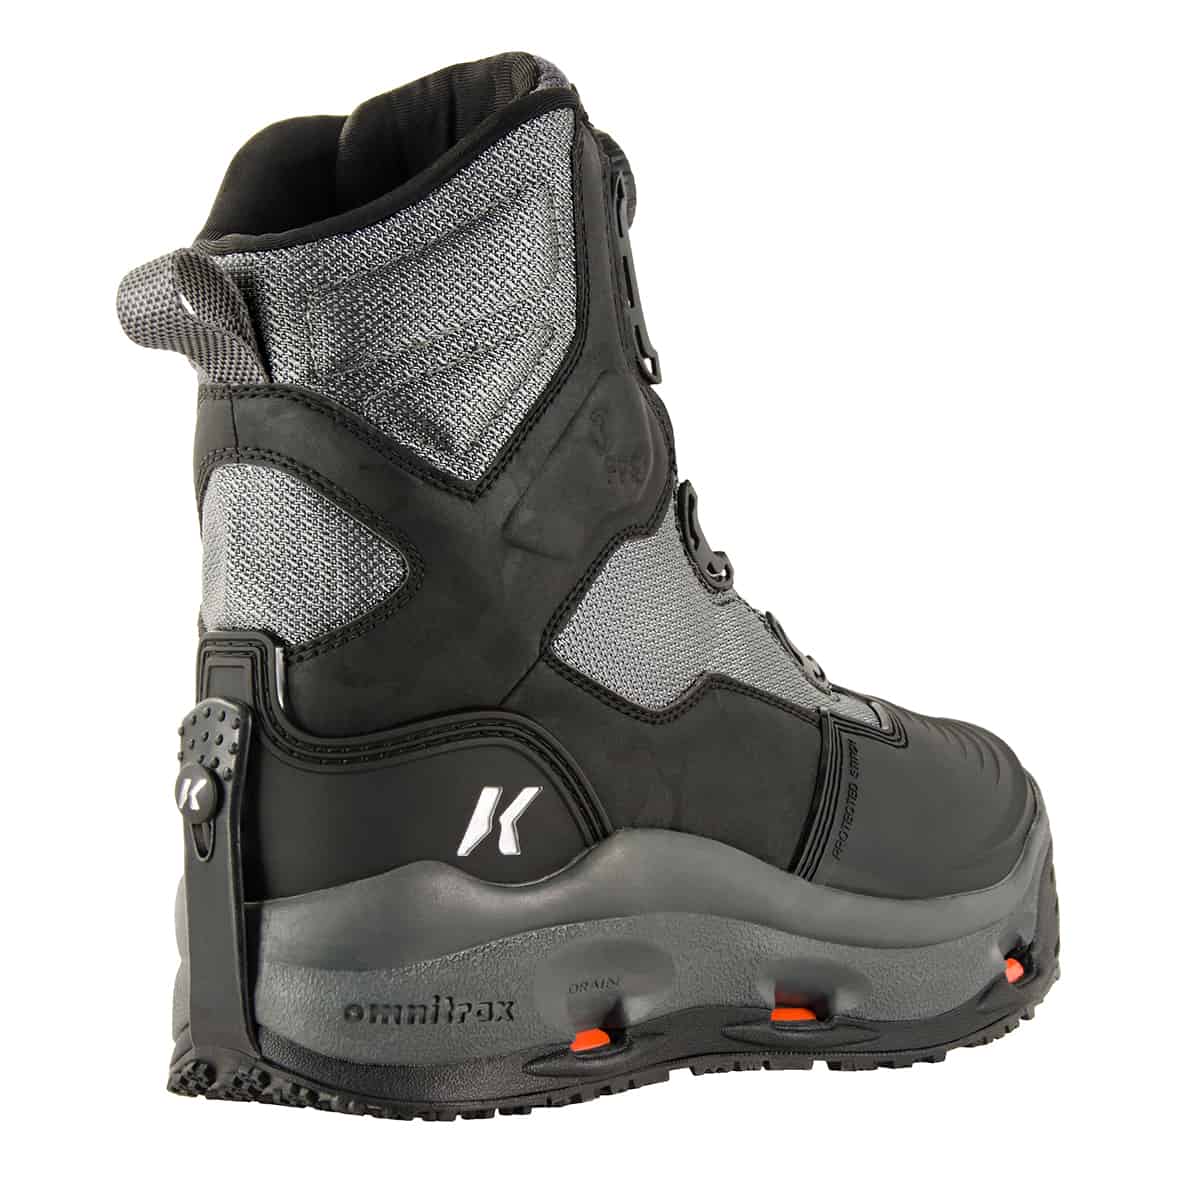 korkers darkhorse wading boot 3qtr rear fishing wading boot with boa lacing